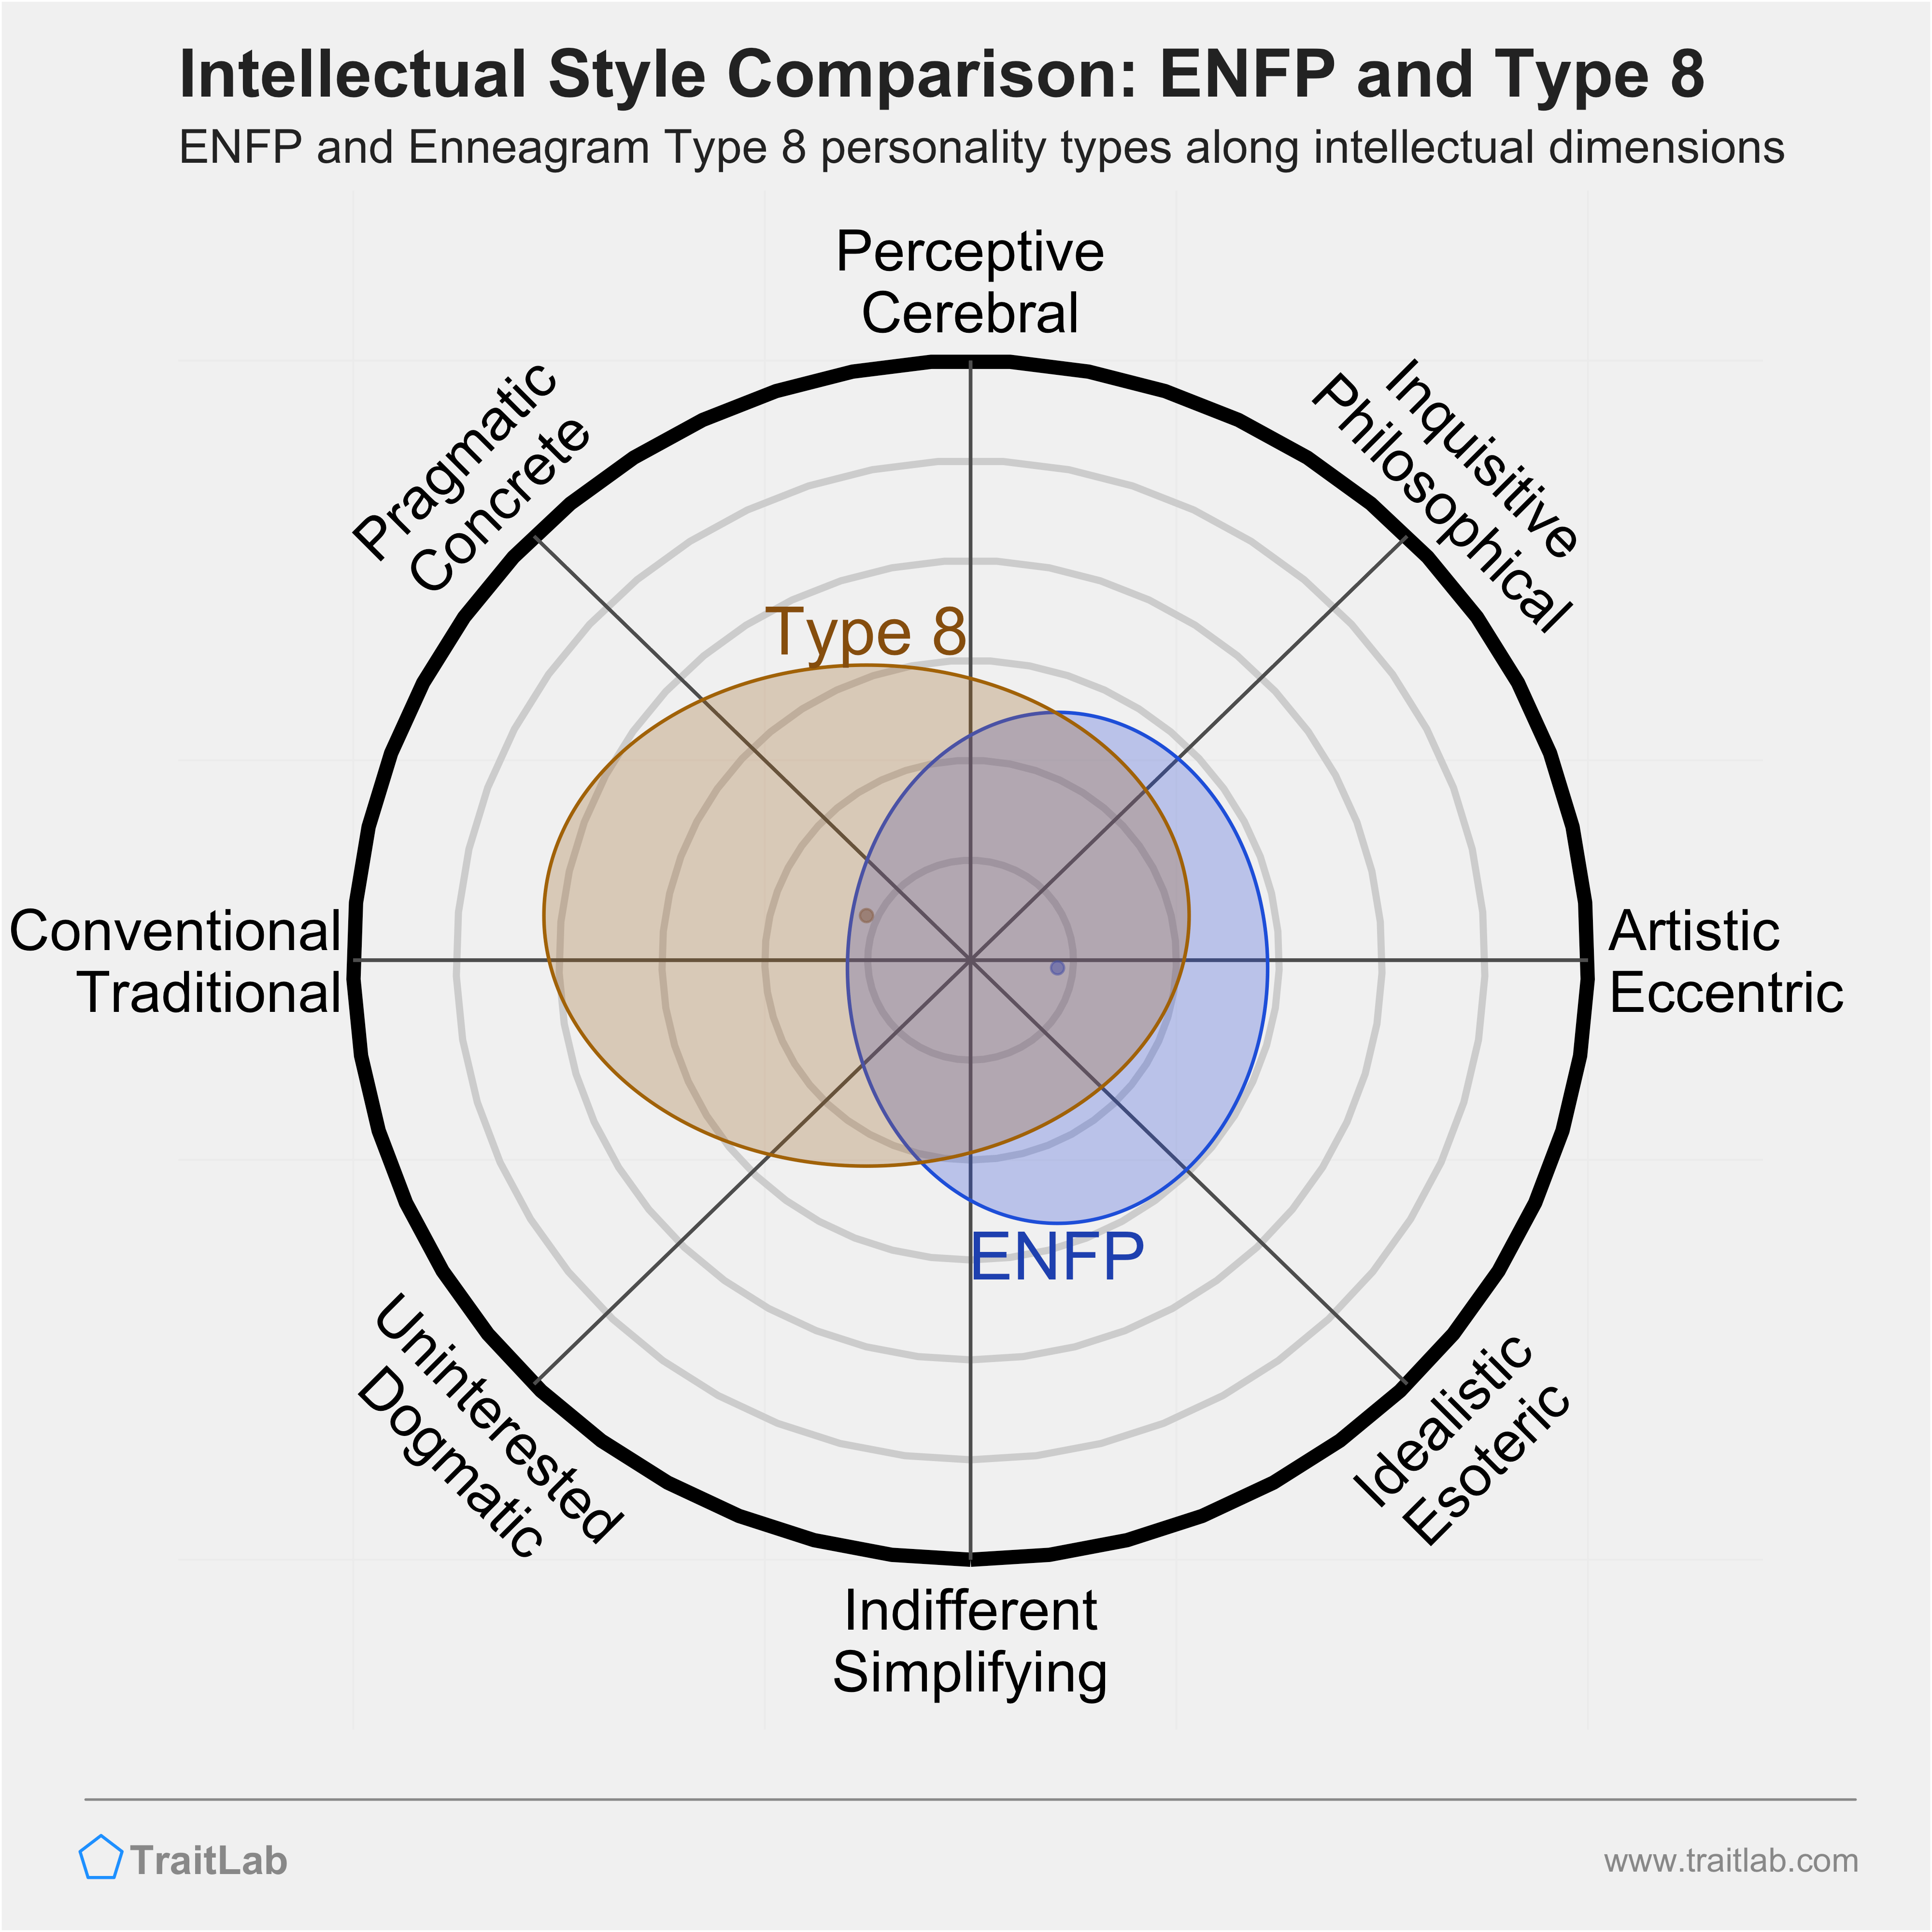 ENFP and Type 8 comparison across intellectual dimensions